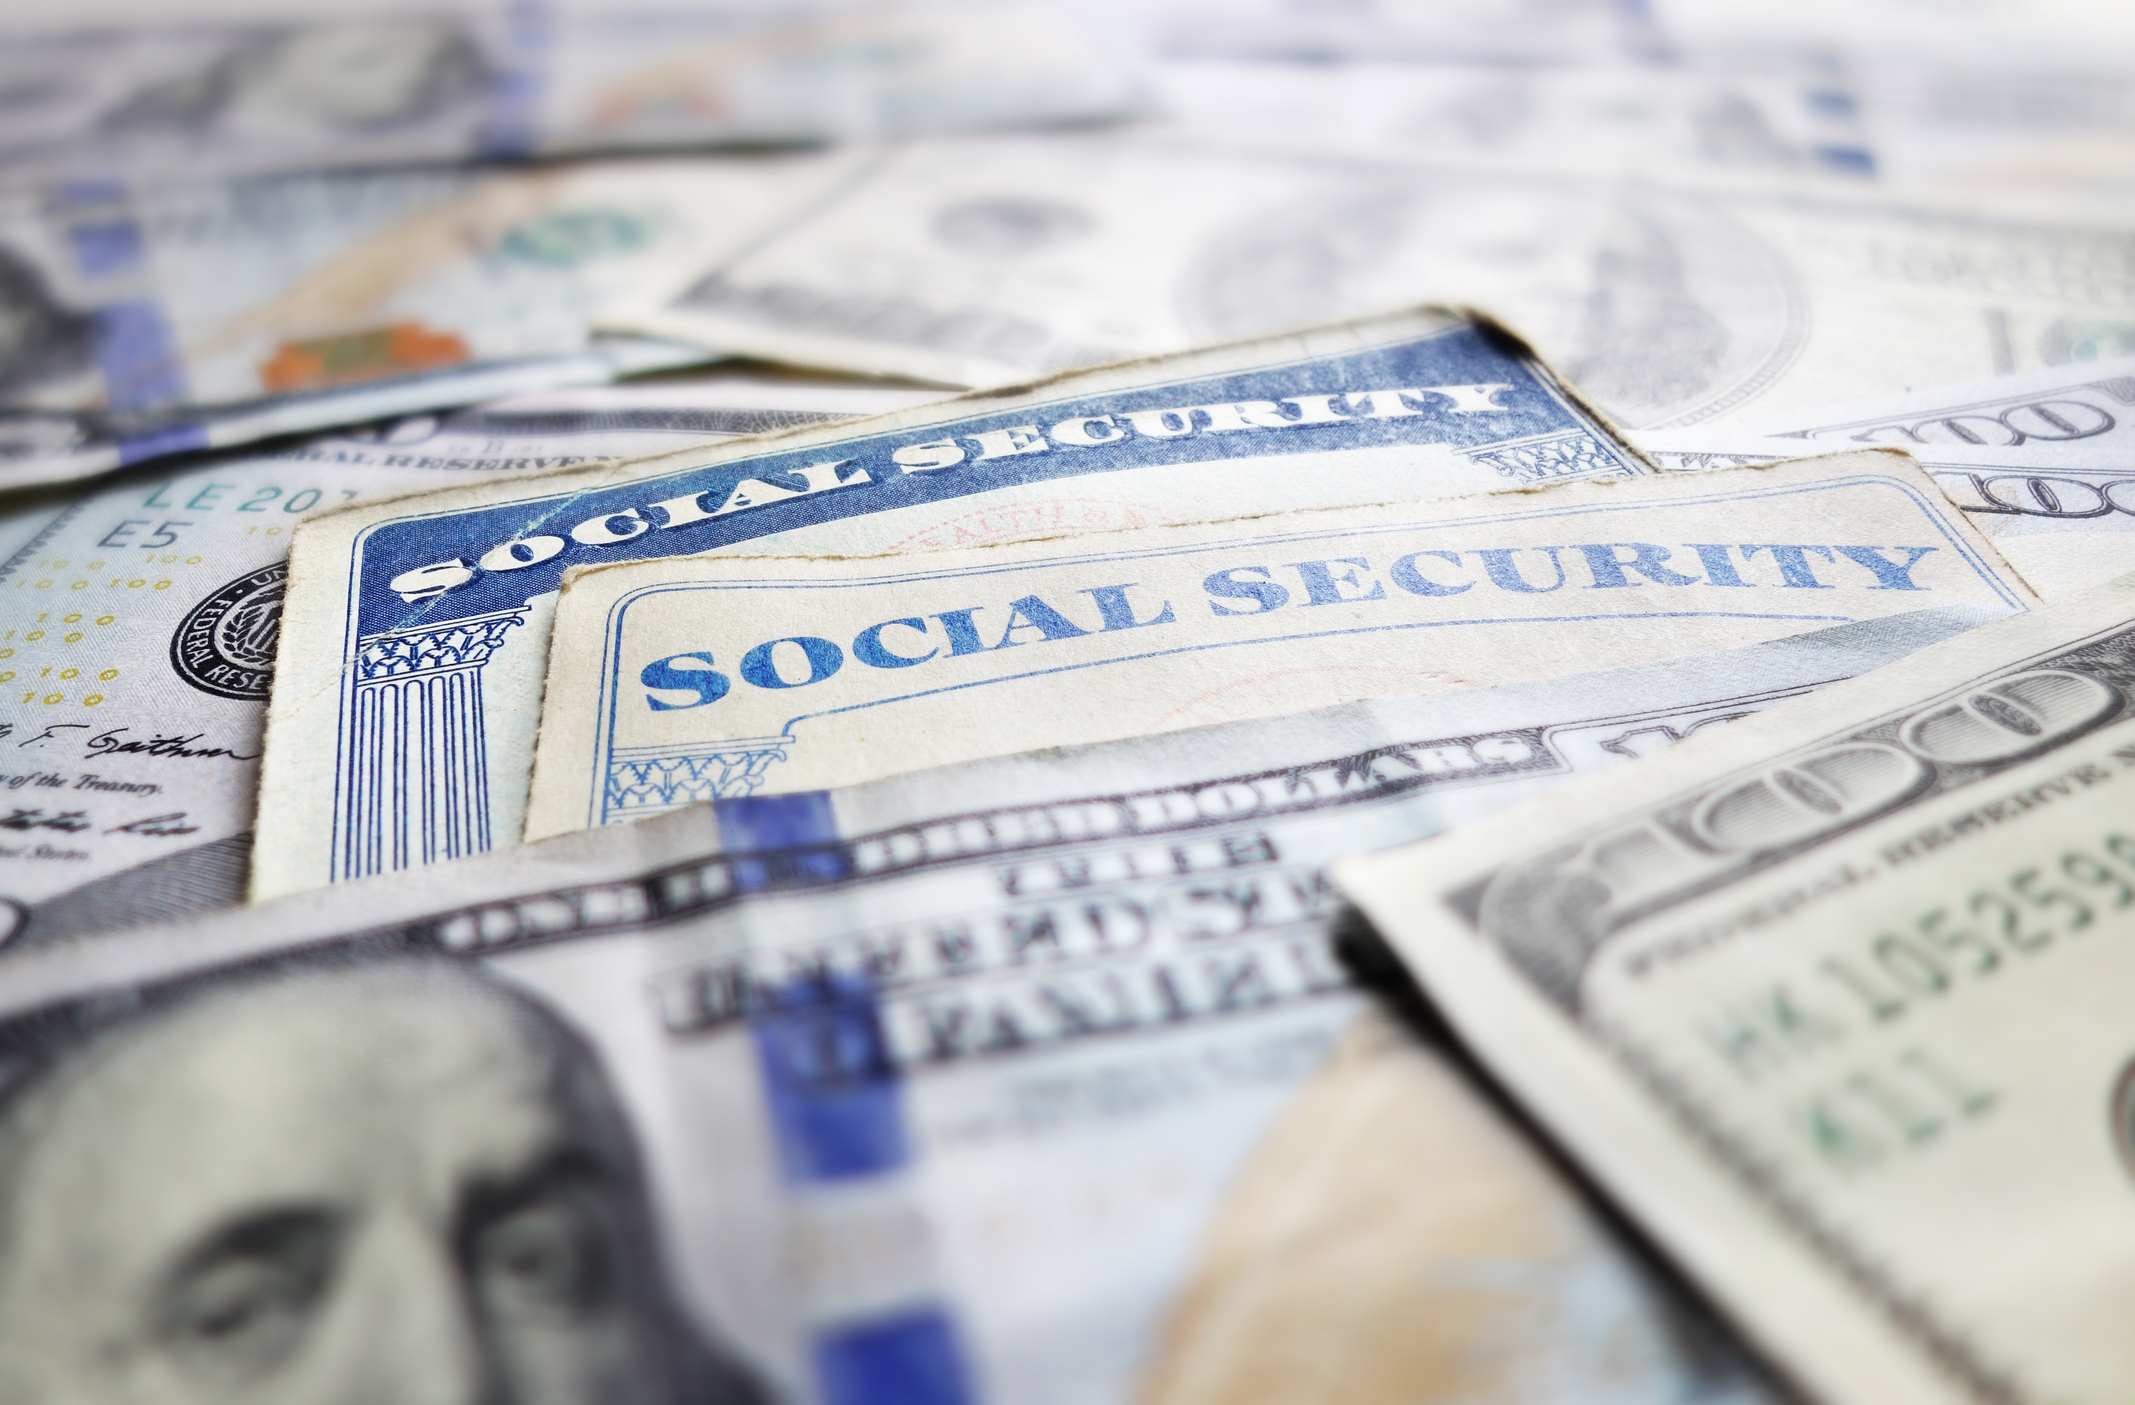 Social Security in the United States